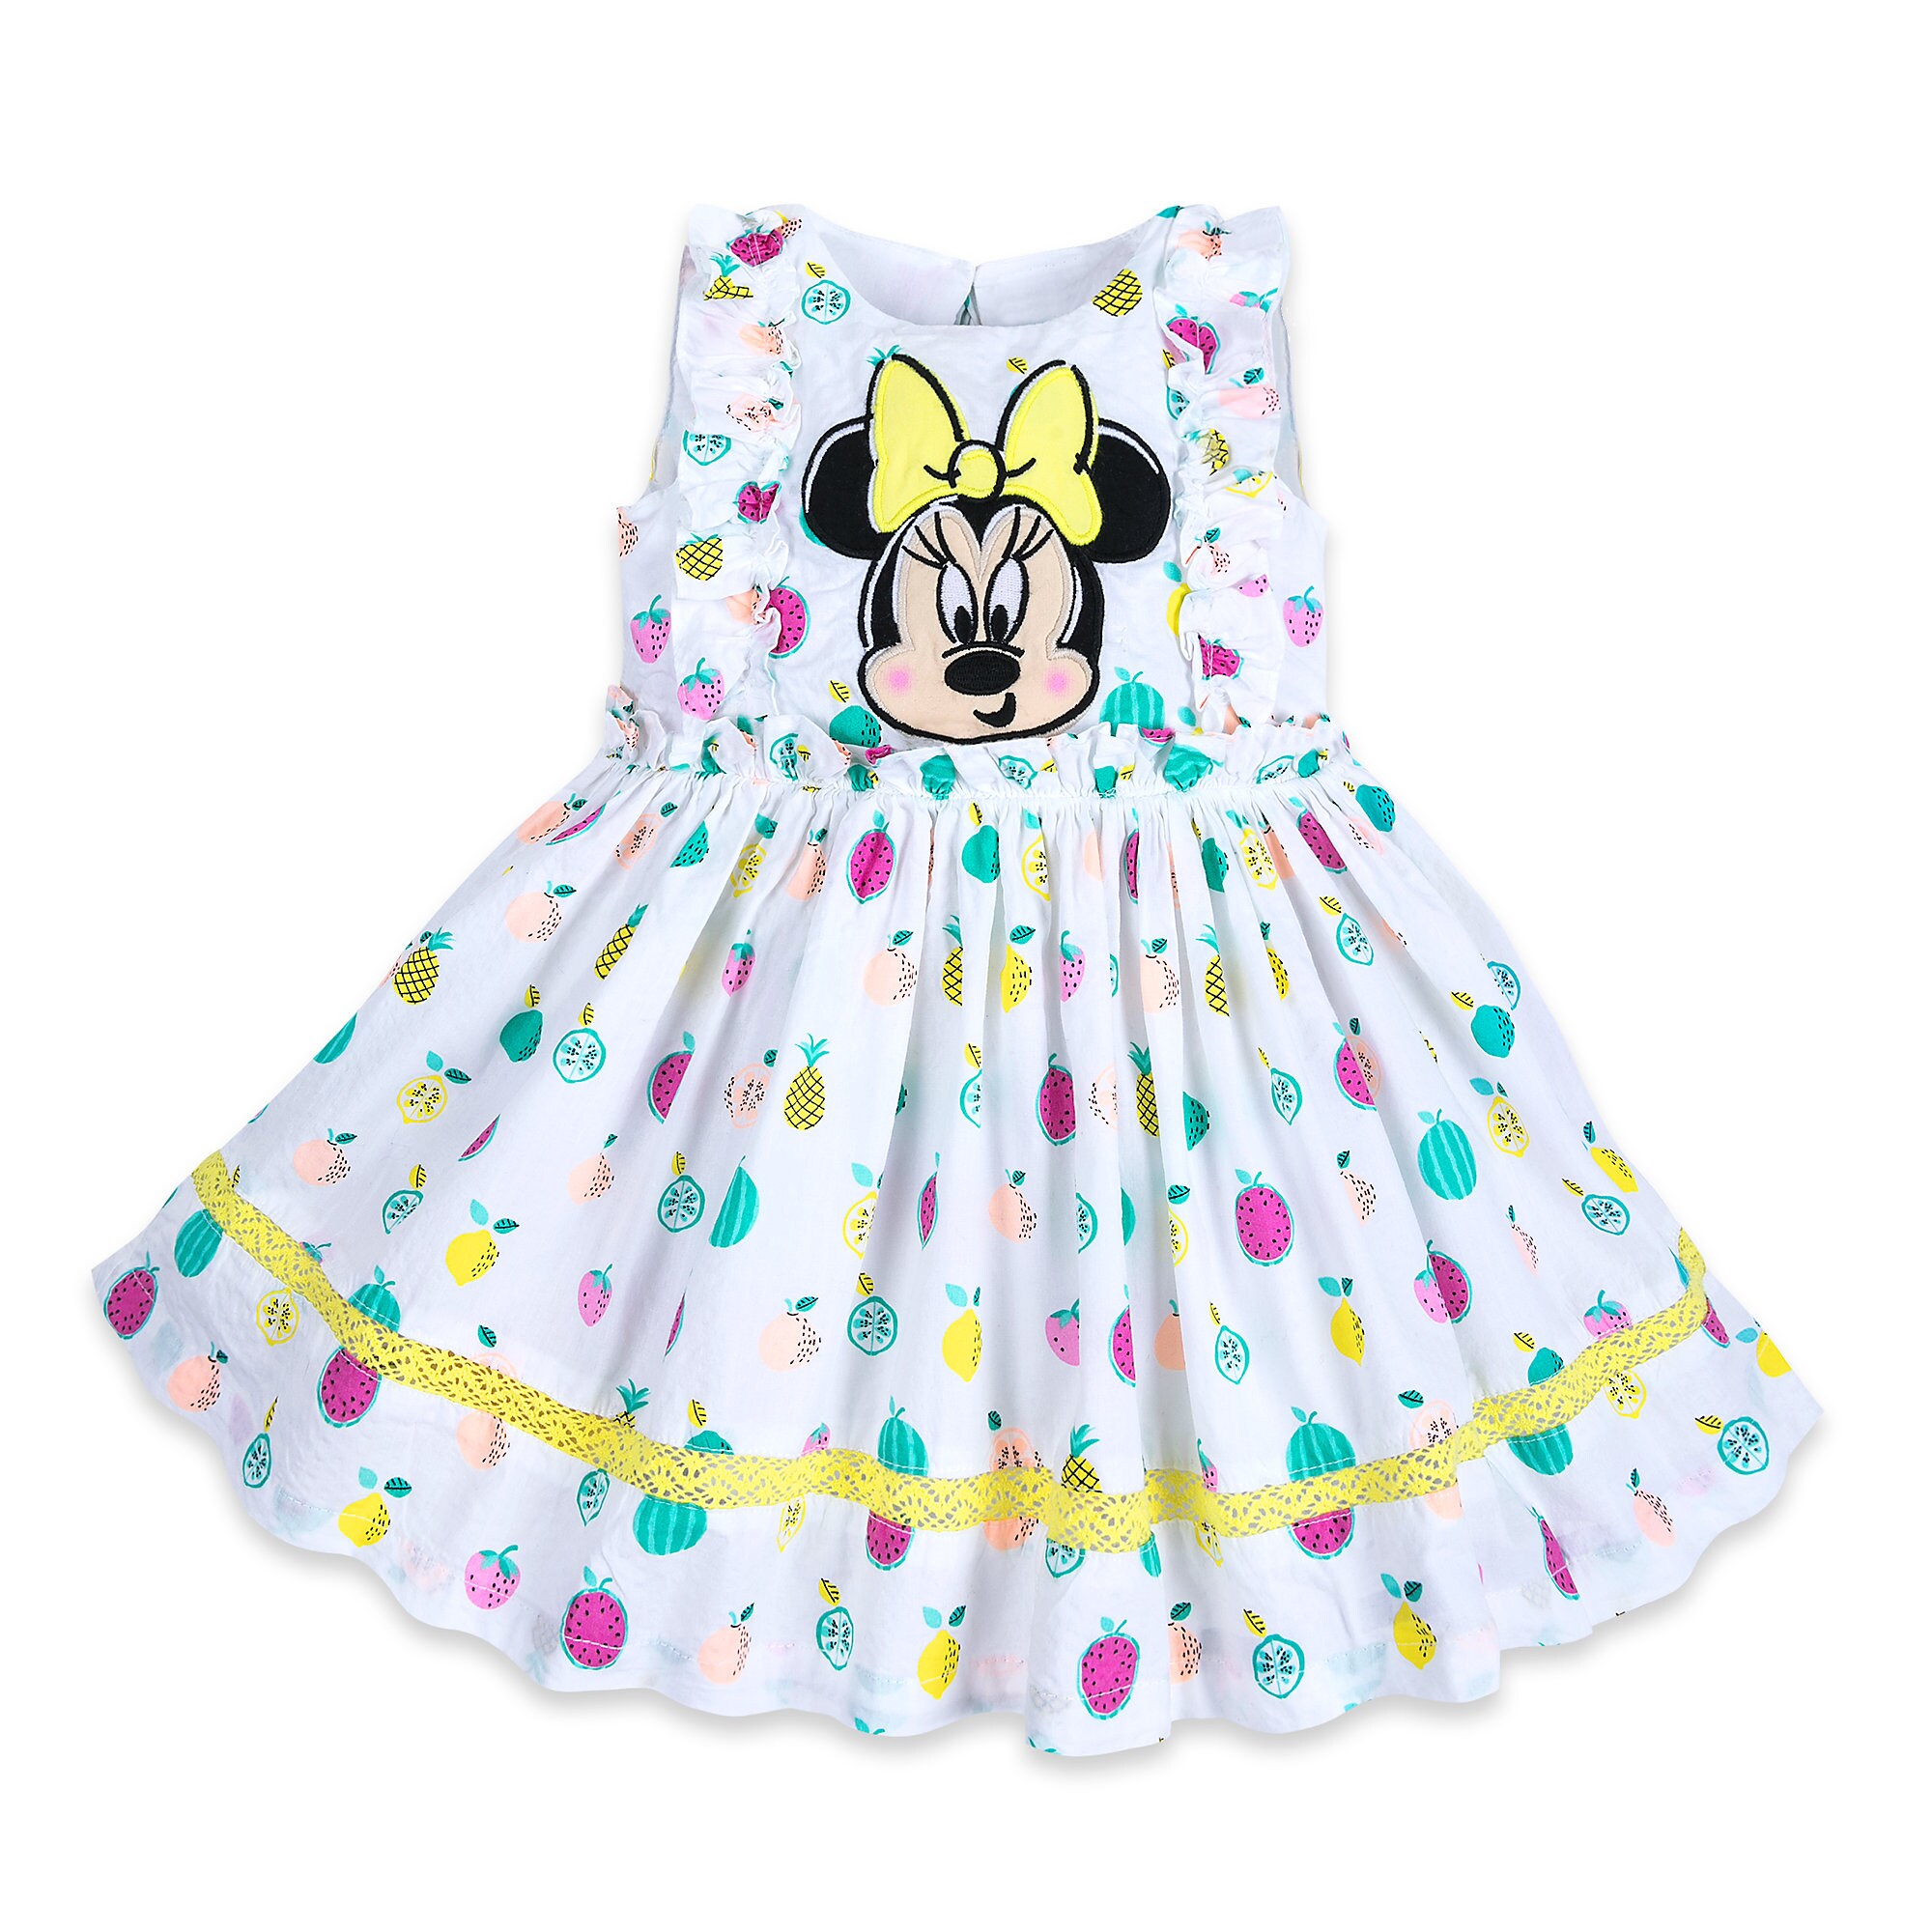 Minnie Mouse Fruit Print Dress Set for Baby